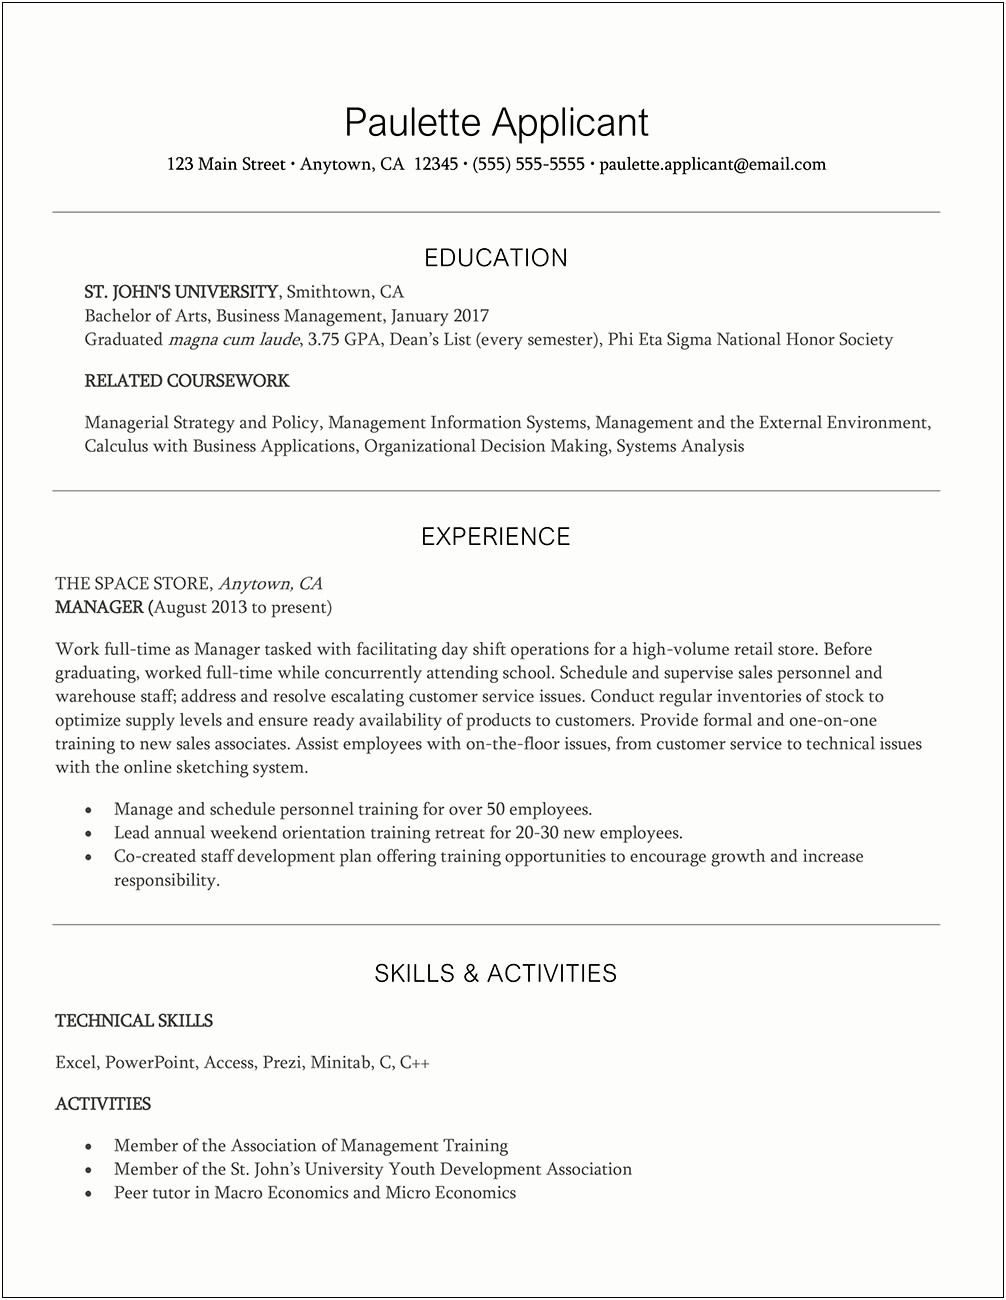 Resume Tips For Management Positions